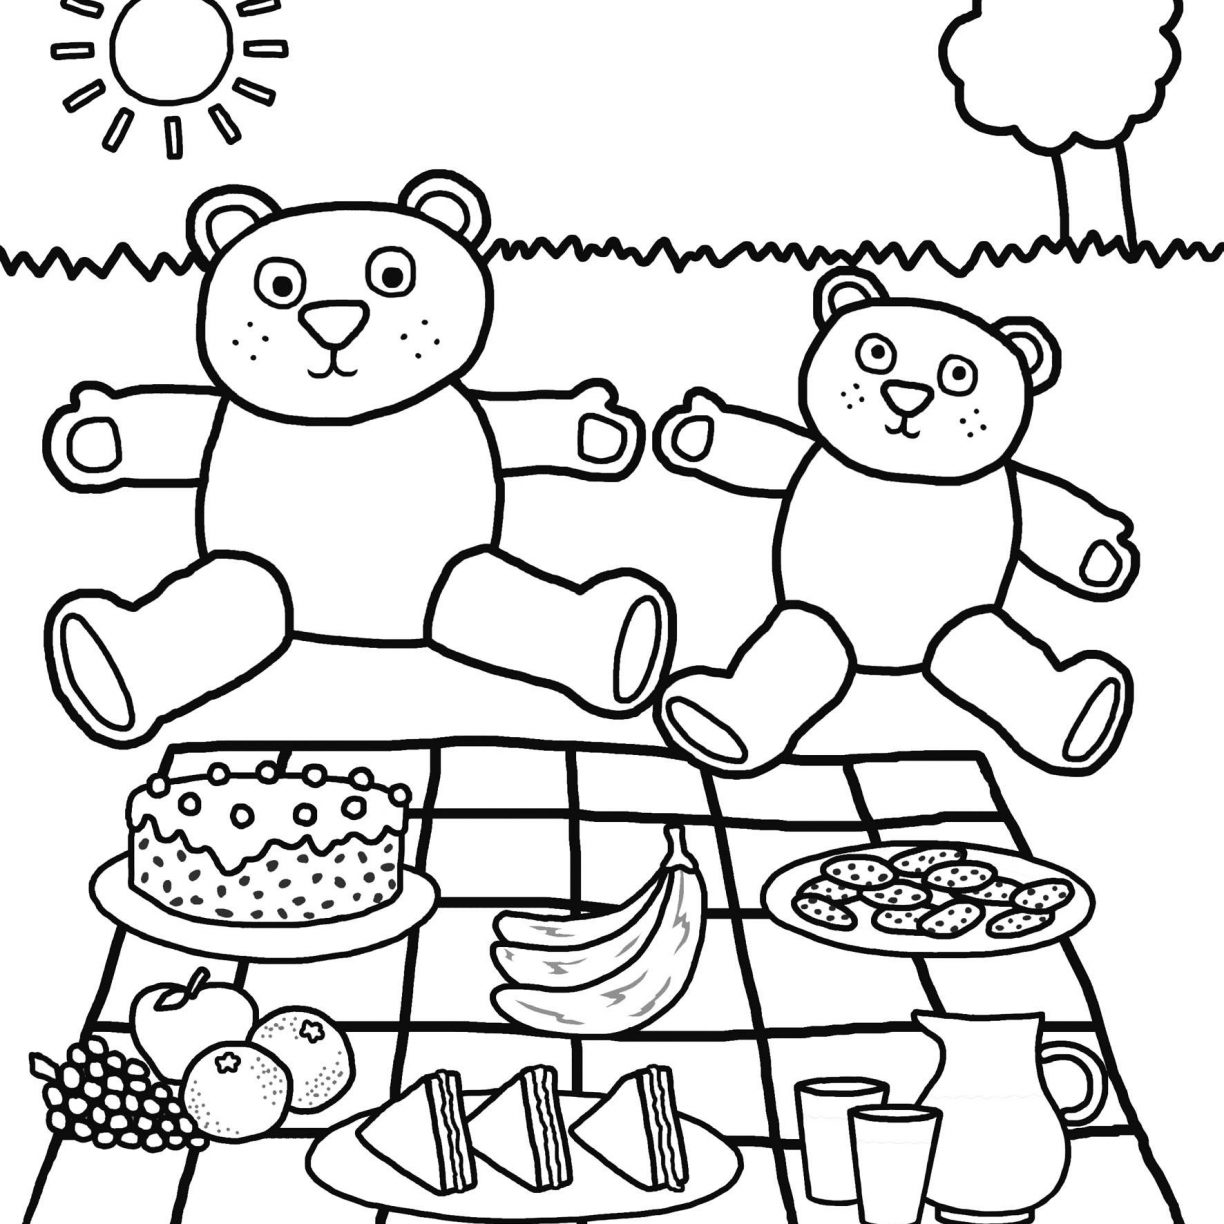 back-to-school-coloring-pages-best-coloring-pages-for-kids